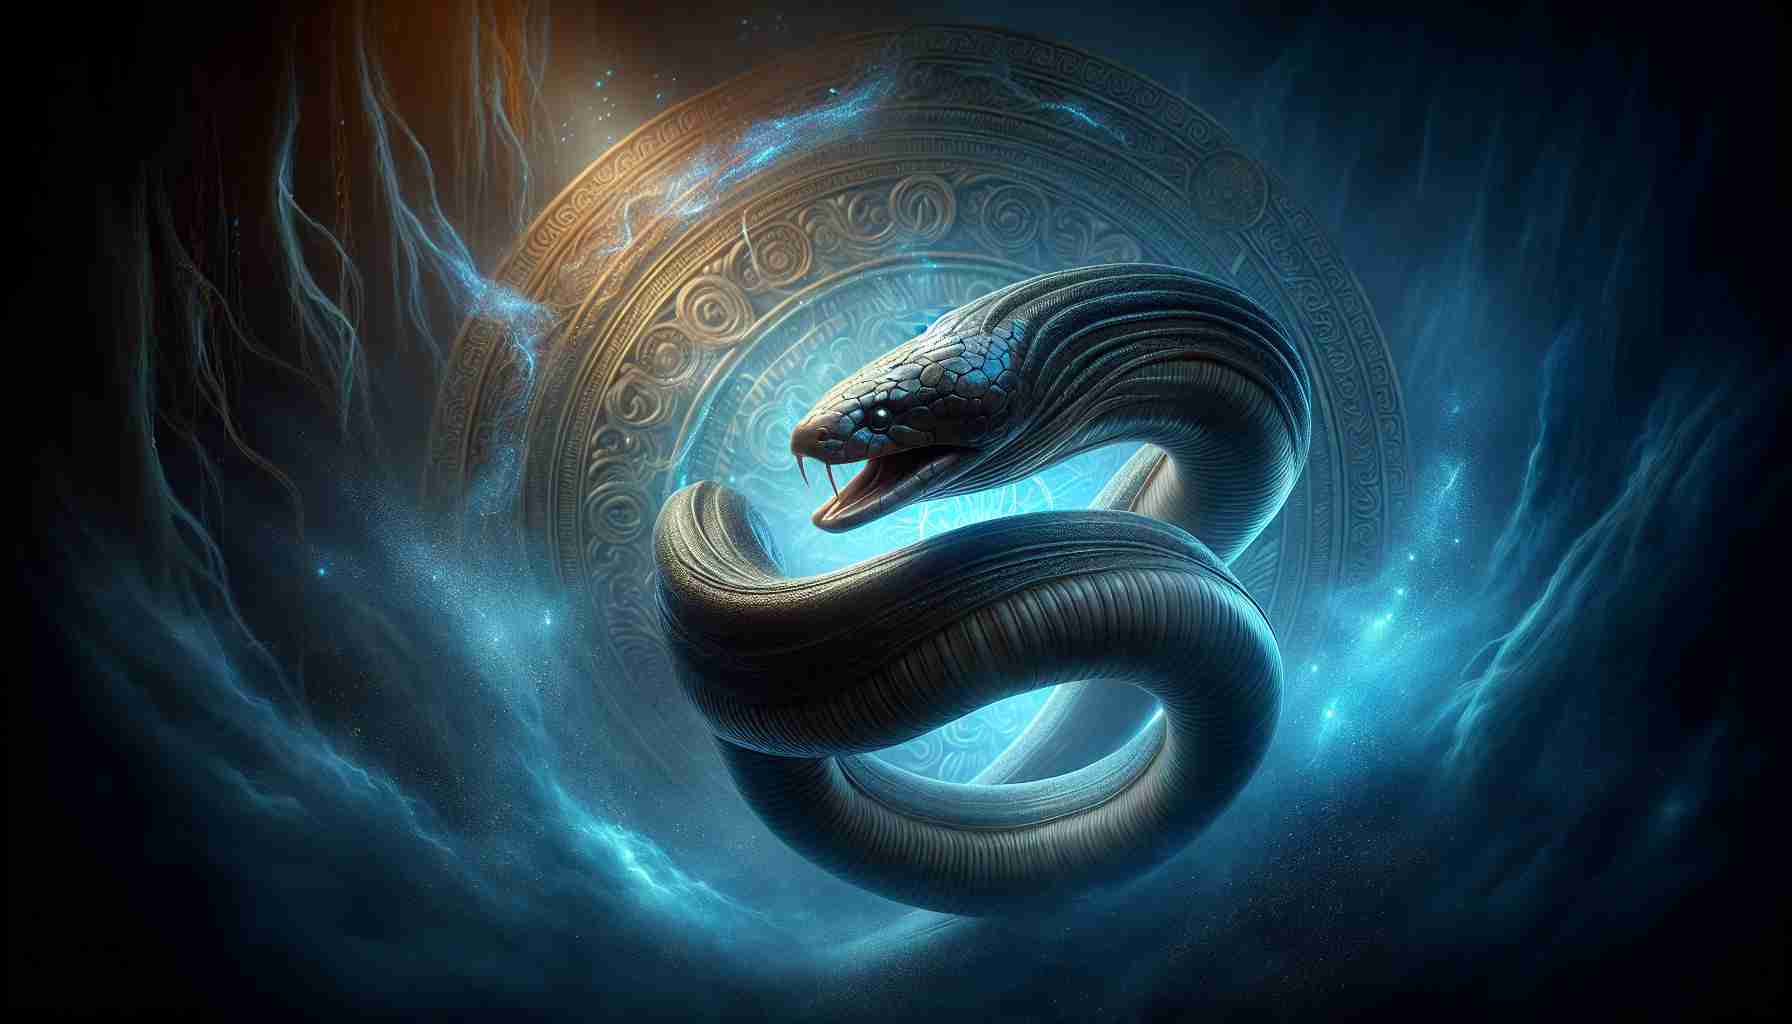 Realistic HD image of a mysterious eel from a folklore, surrounded by the aura of legend and mysticism.